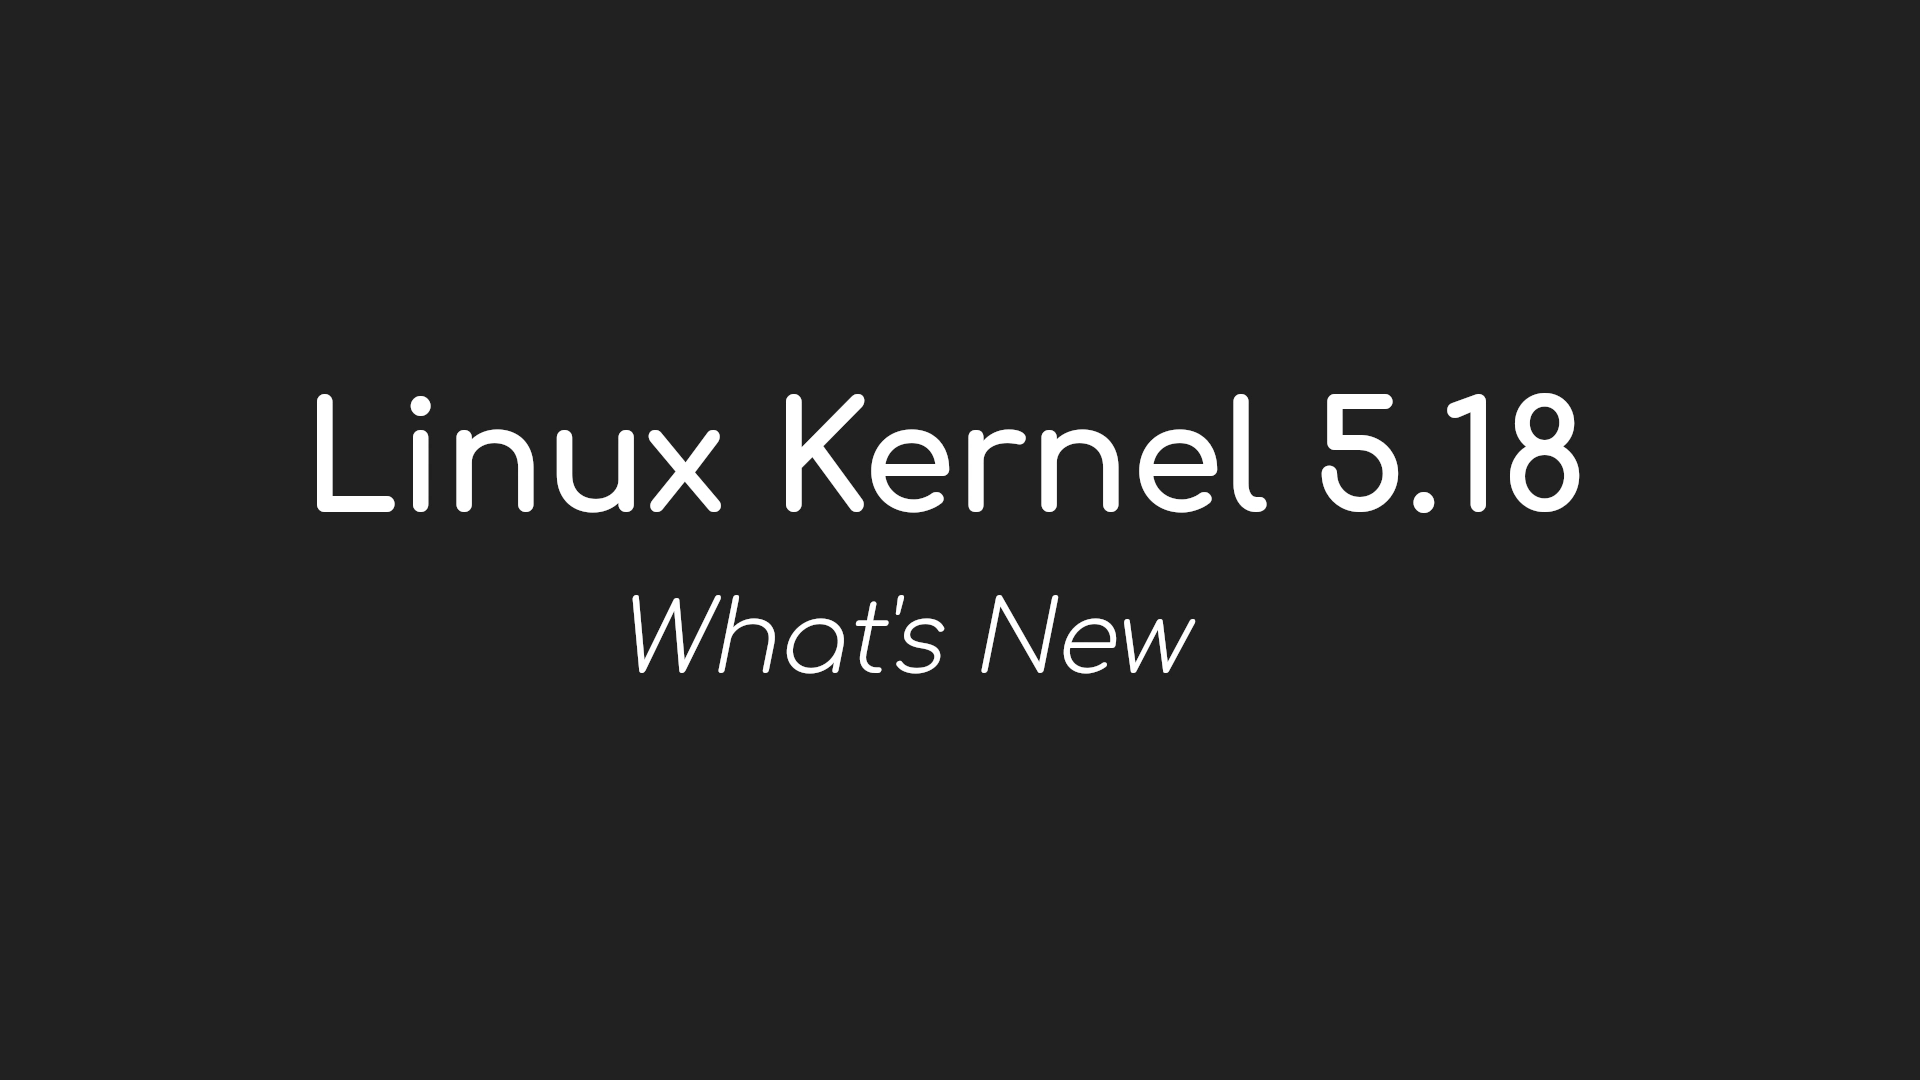 Linux Kernel 5.18 Officially Released, This Is What’s New